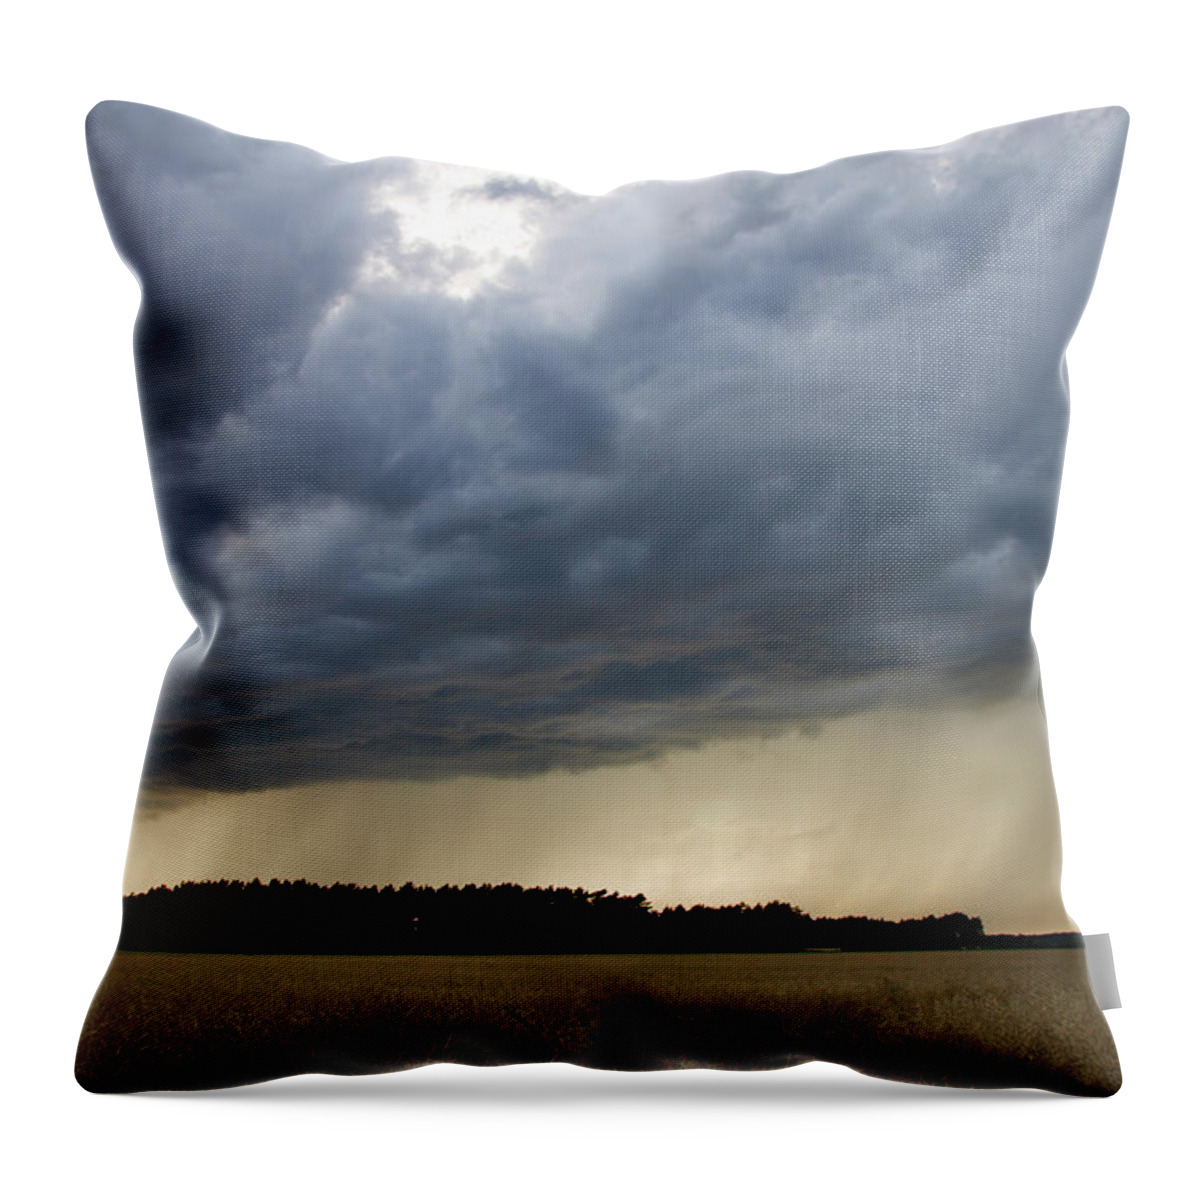 Wind Throw Pillow featuring the photograph Rain Shower by Cschoeps